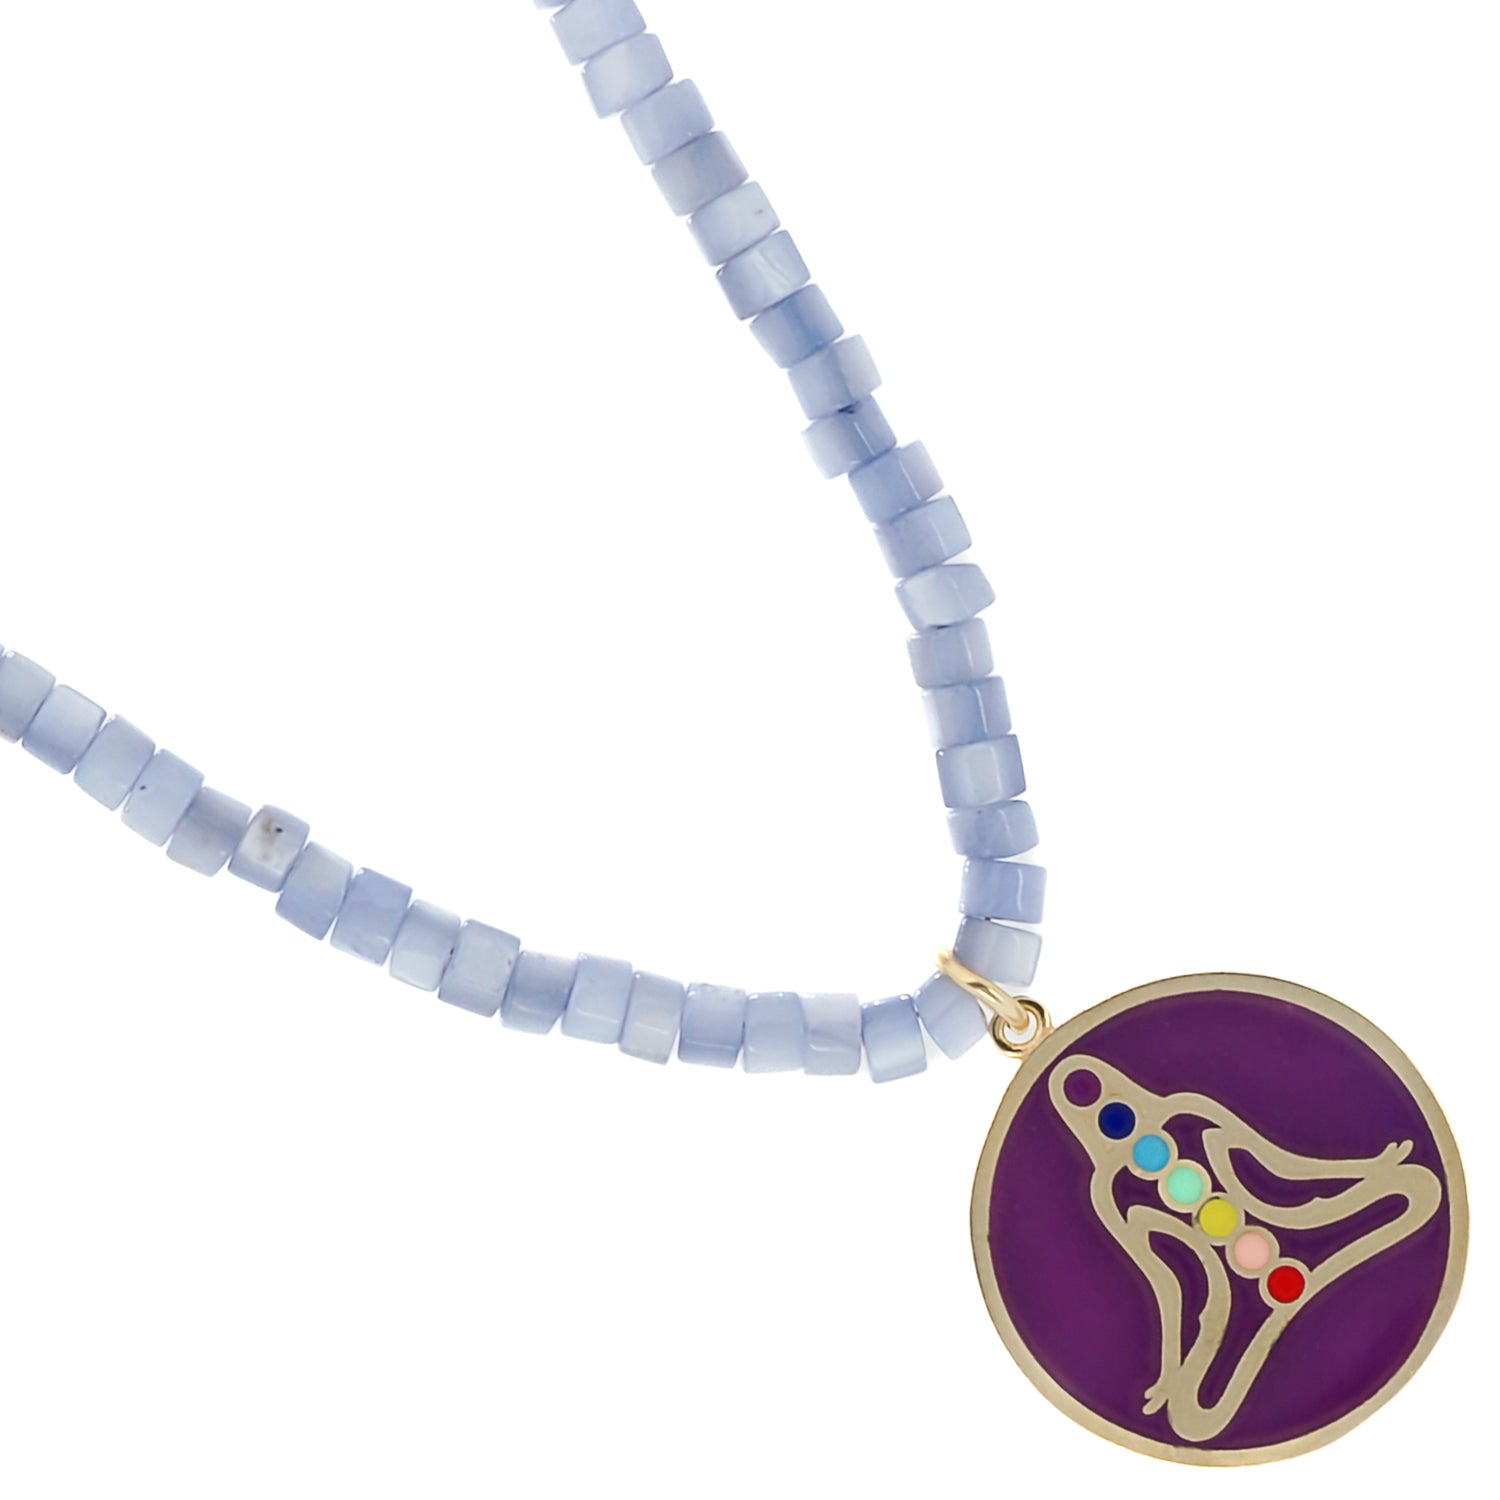 Necklace featuring a handmade chakra pendant and elegant lilac color pearl beads.